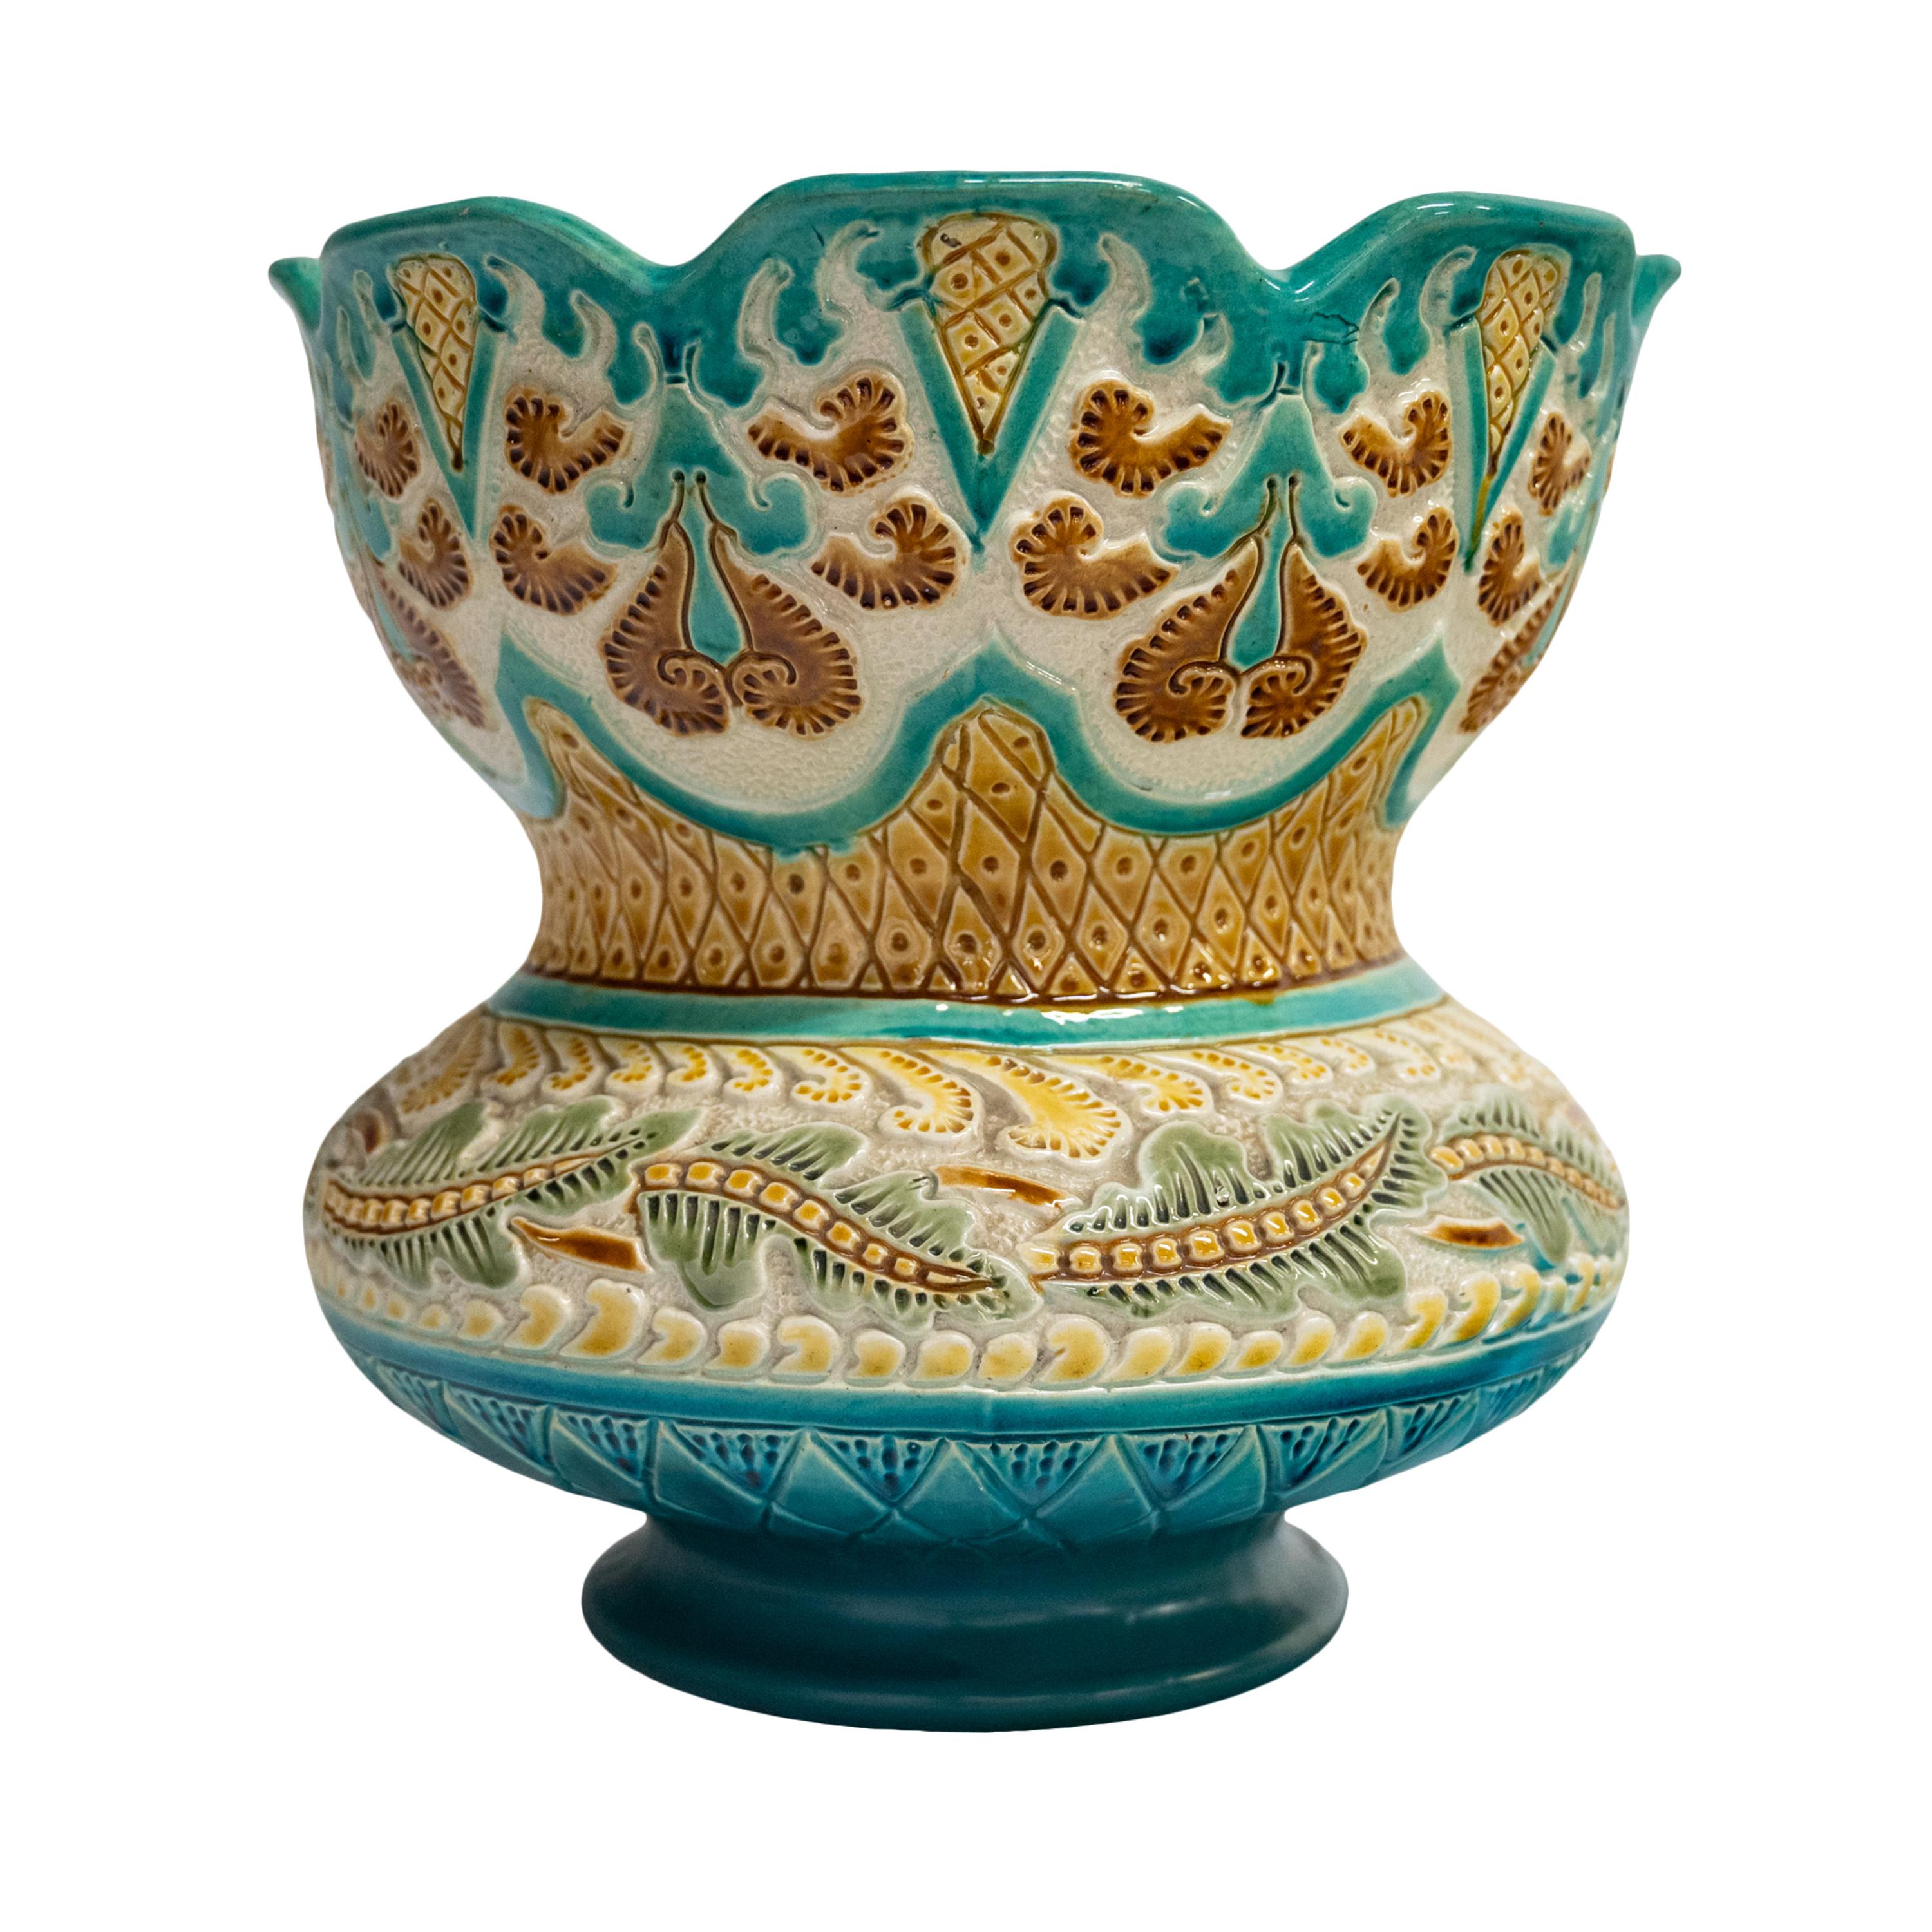 Antique Art Nouveau Burmantofts Faience Majolica Pottery Stand & Jardiniere 1895 In Good Condition For Sale In Portland, OR